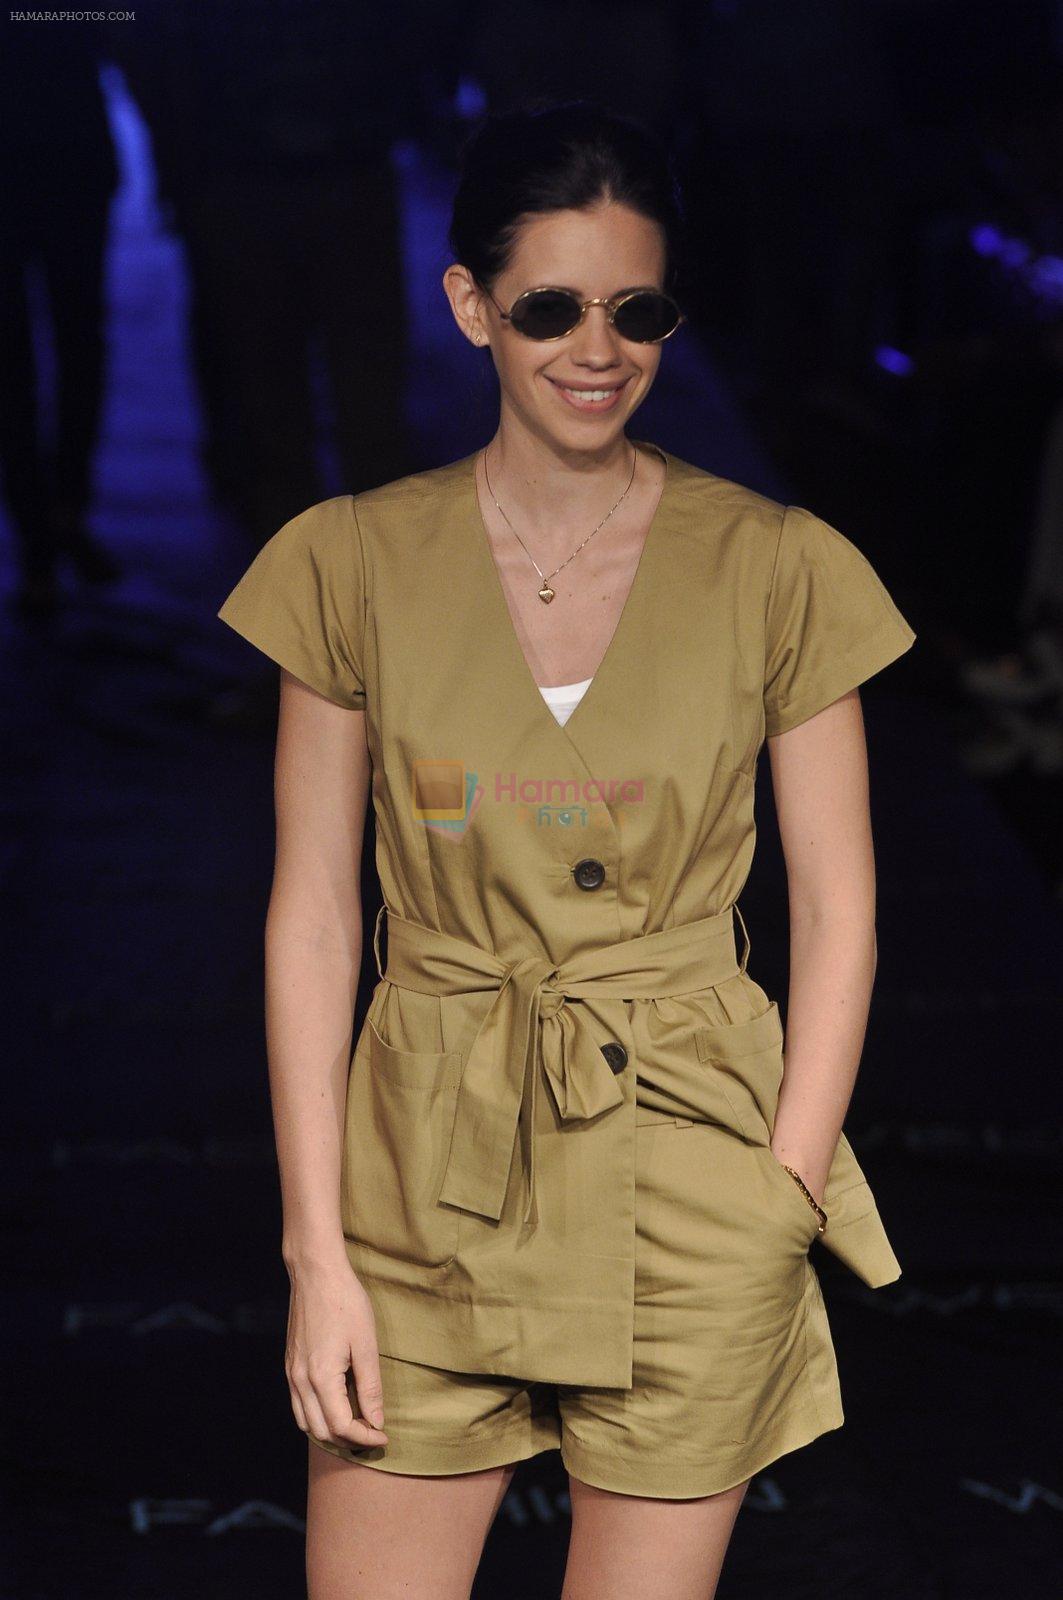 Kalki Koechlin at Quirkbox Show at Lakme Fashion Week 2015 Day 3 on 20th March 2015